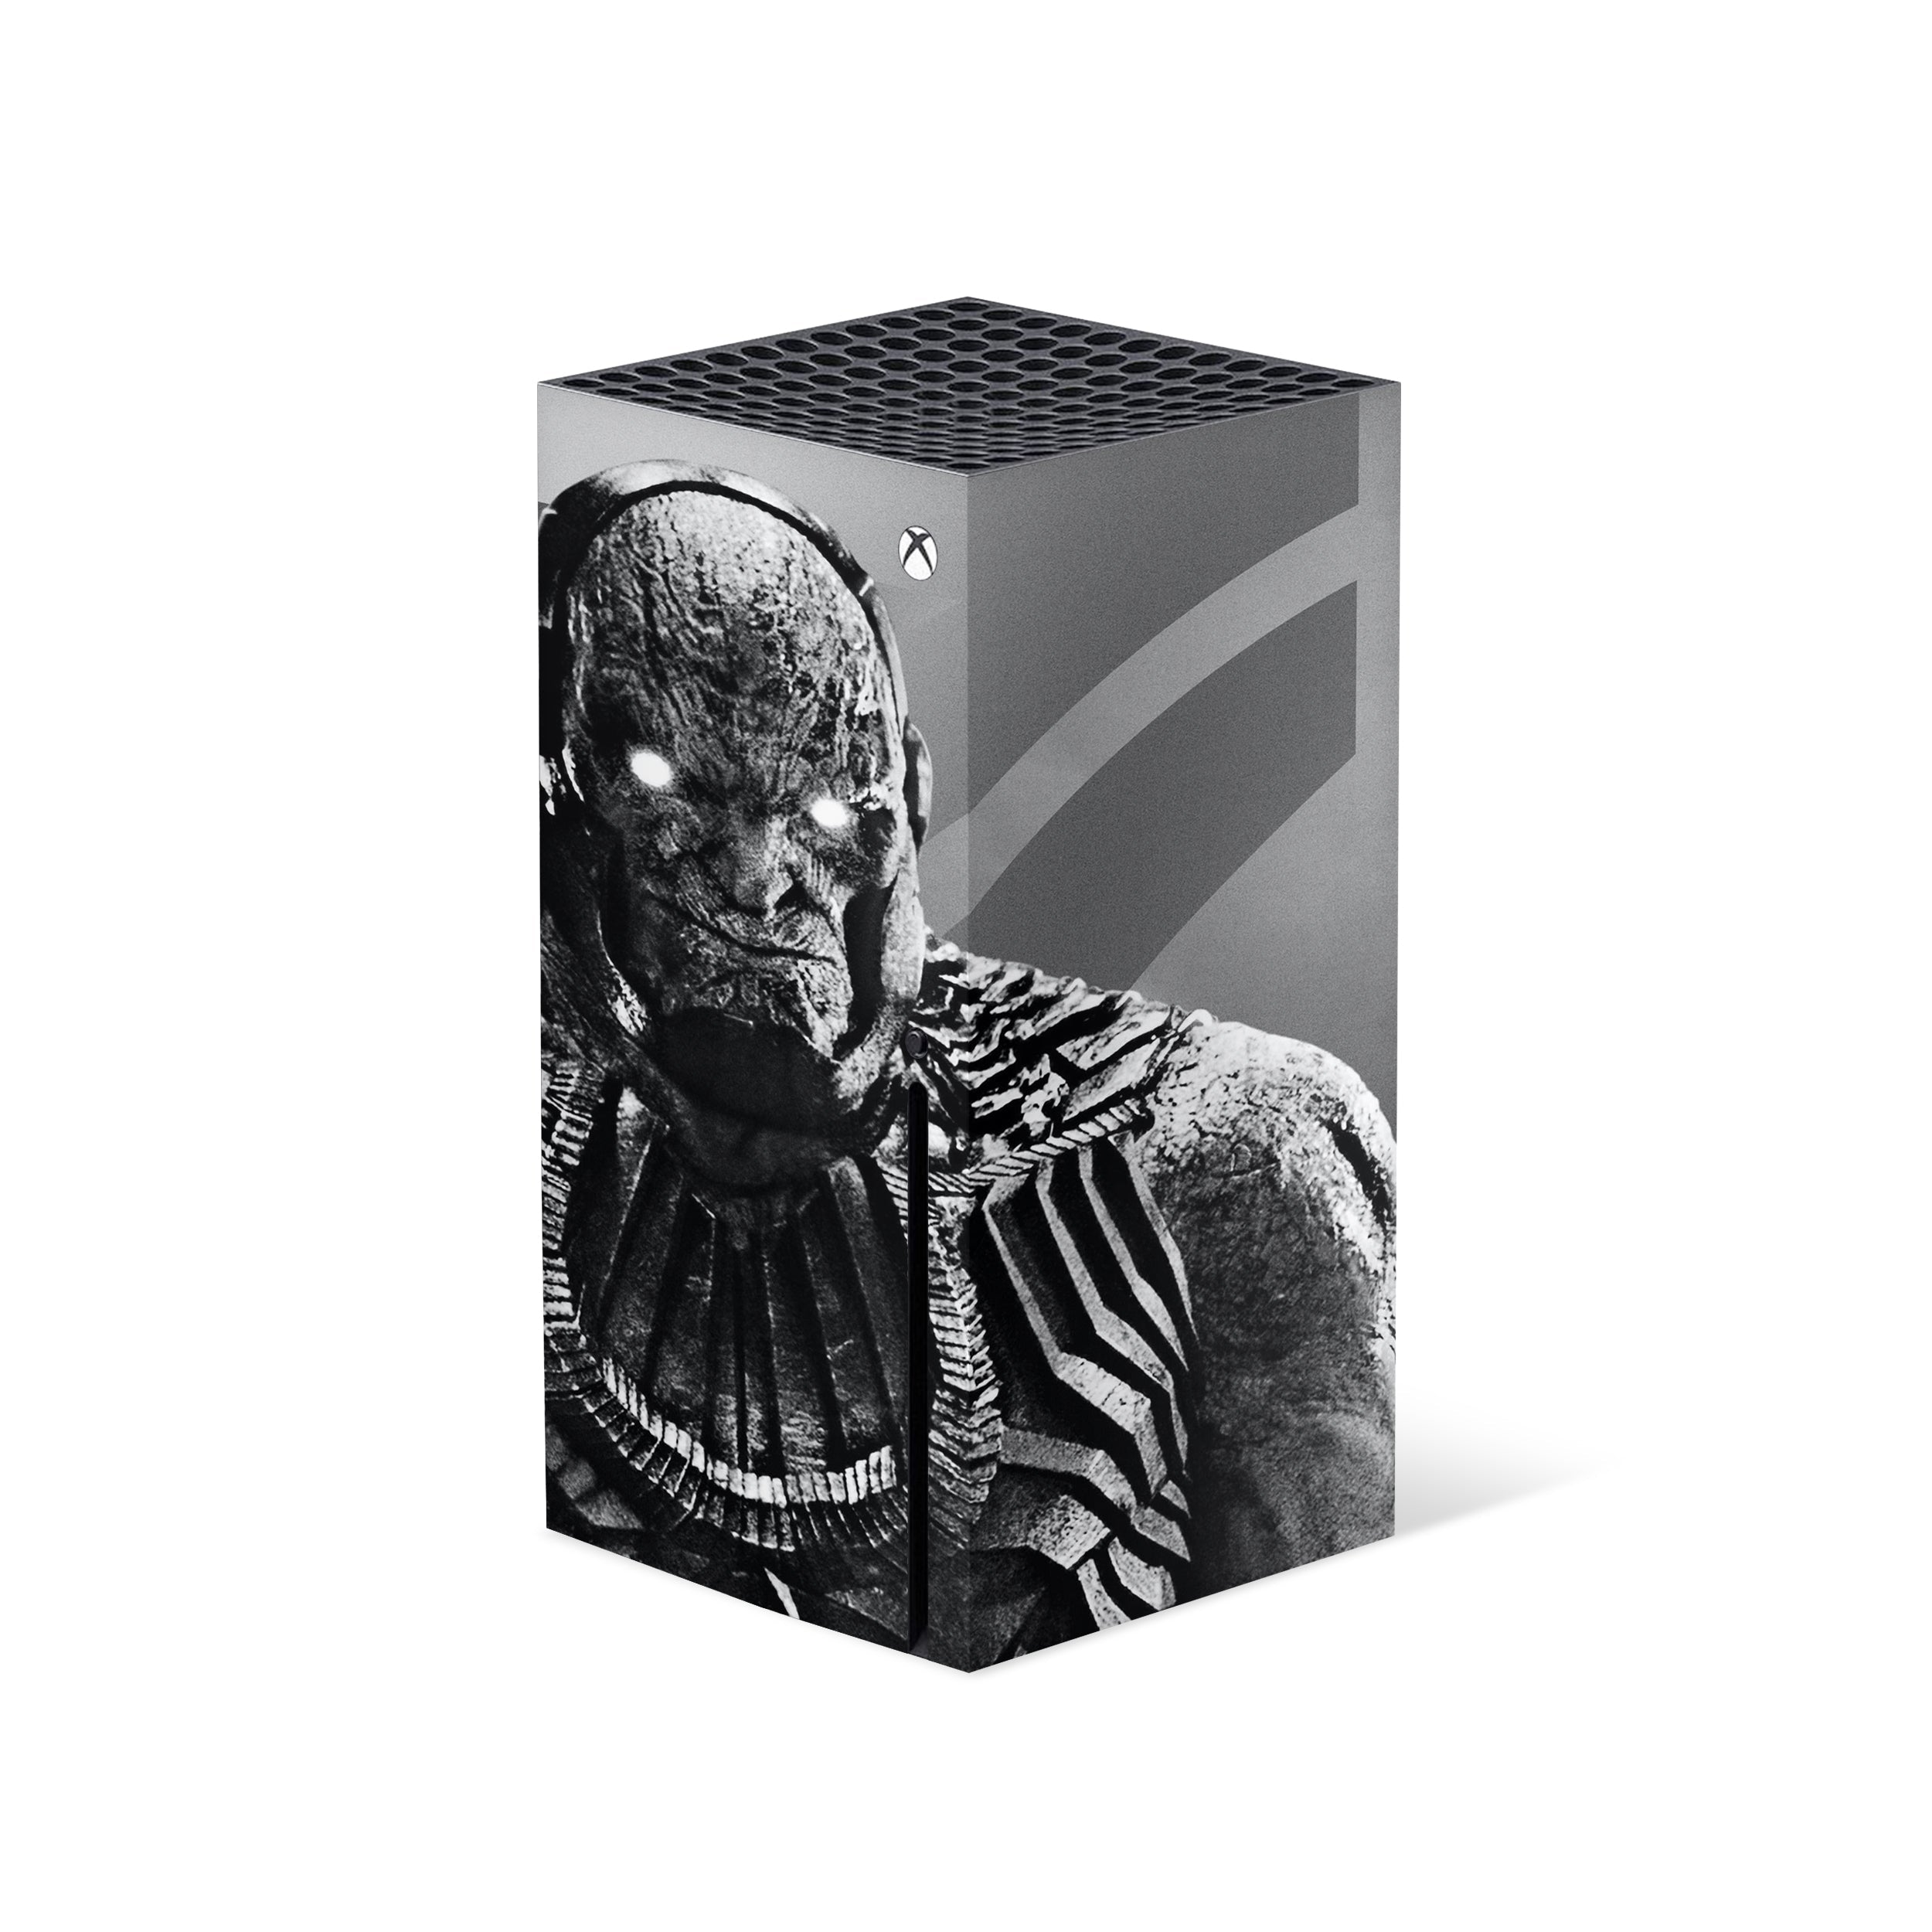 A video game skin featuring a DC Comics Darkseid design for the Xbox Series X.